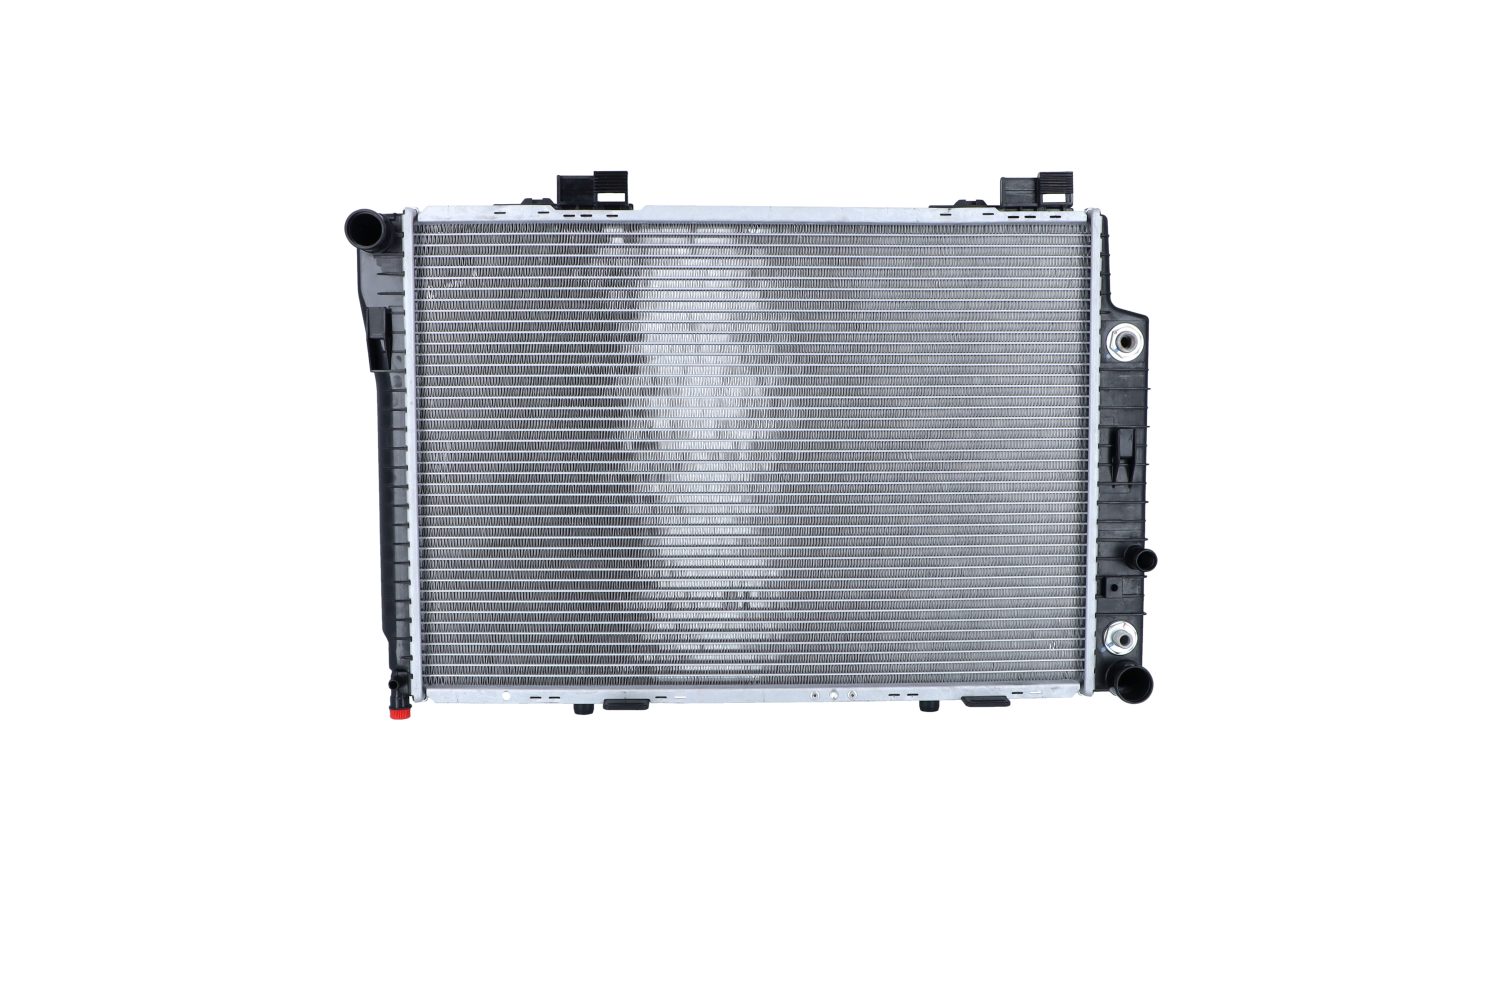 NRF 51282 Engine radiator Aluminium, 615 x 425 x 24 mm, with mounting parts, Brazed cooling fins